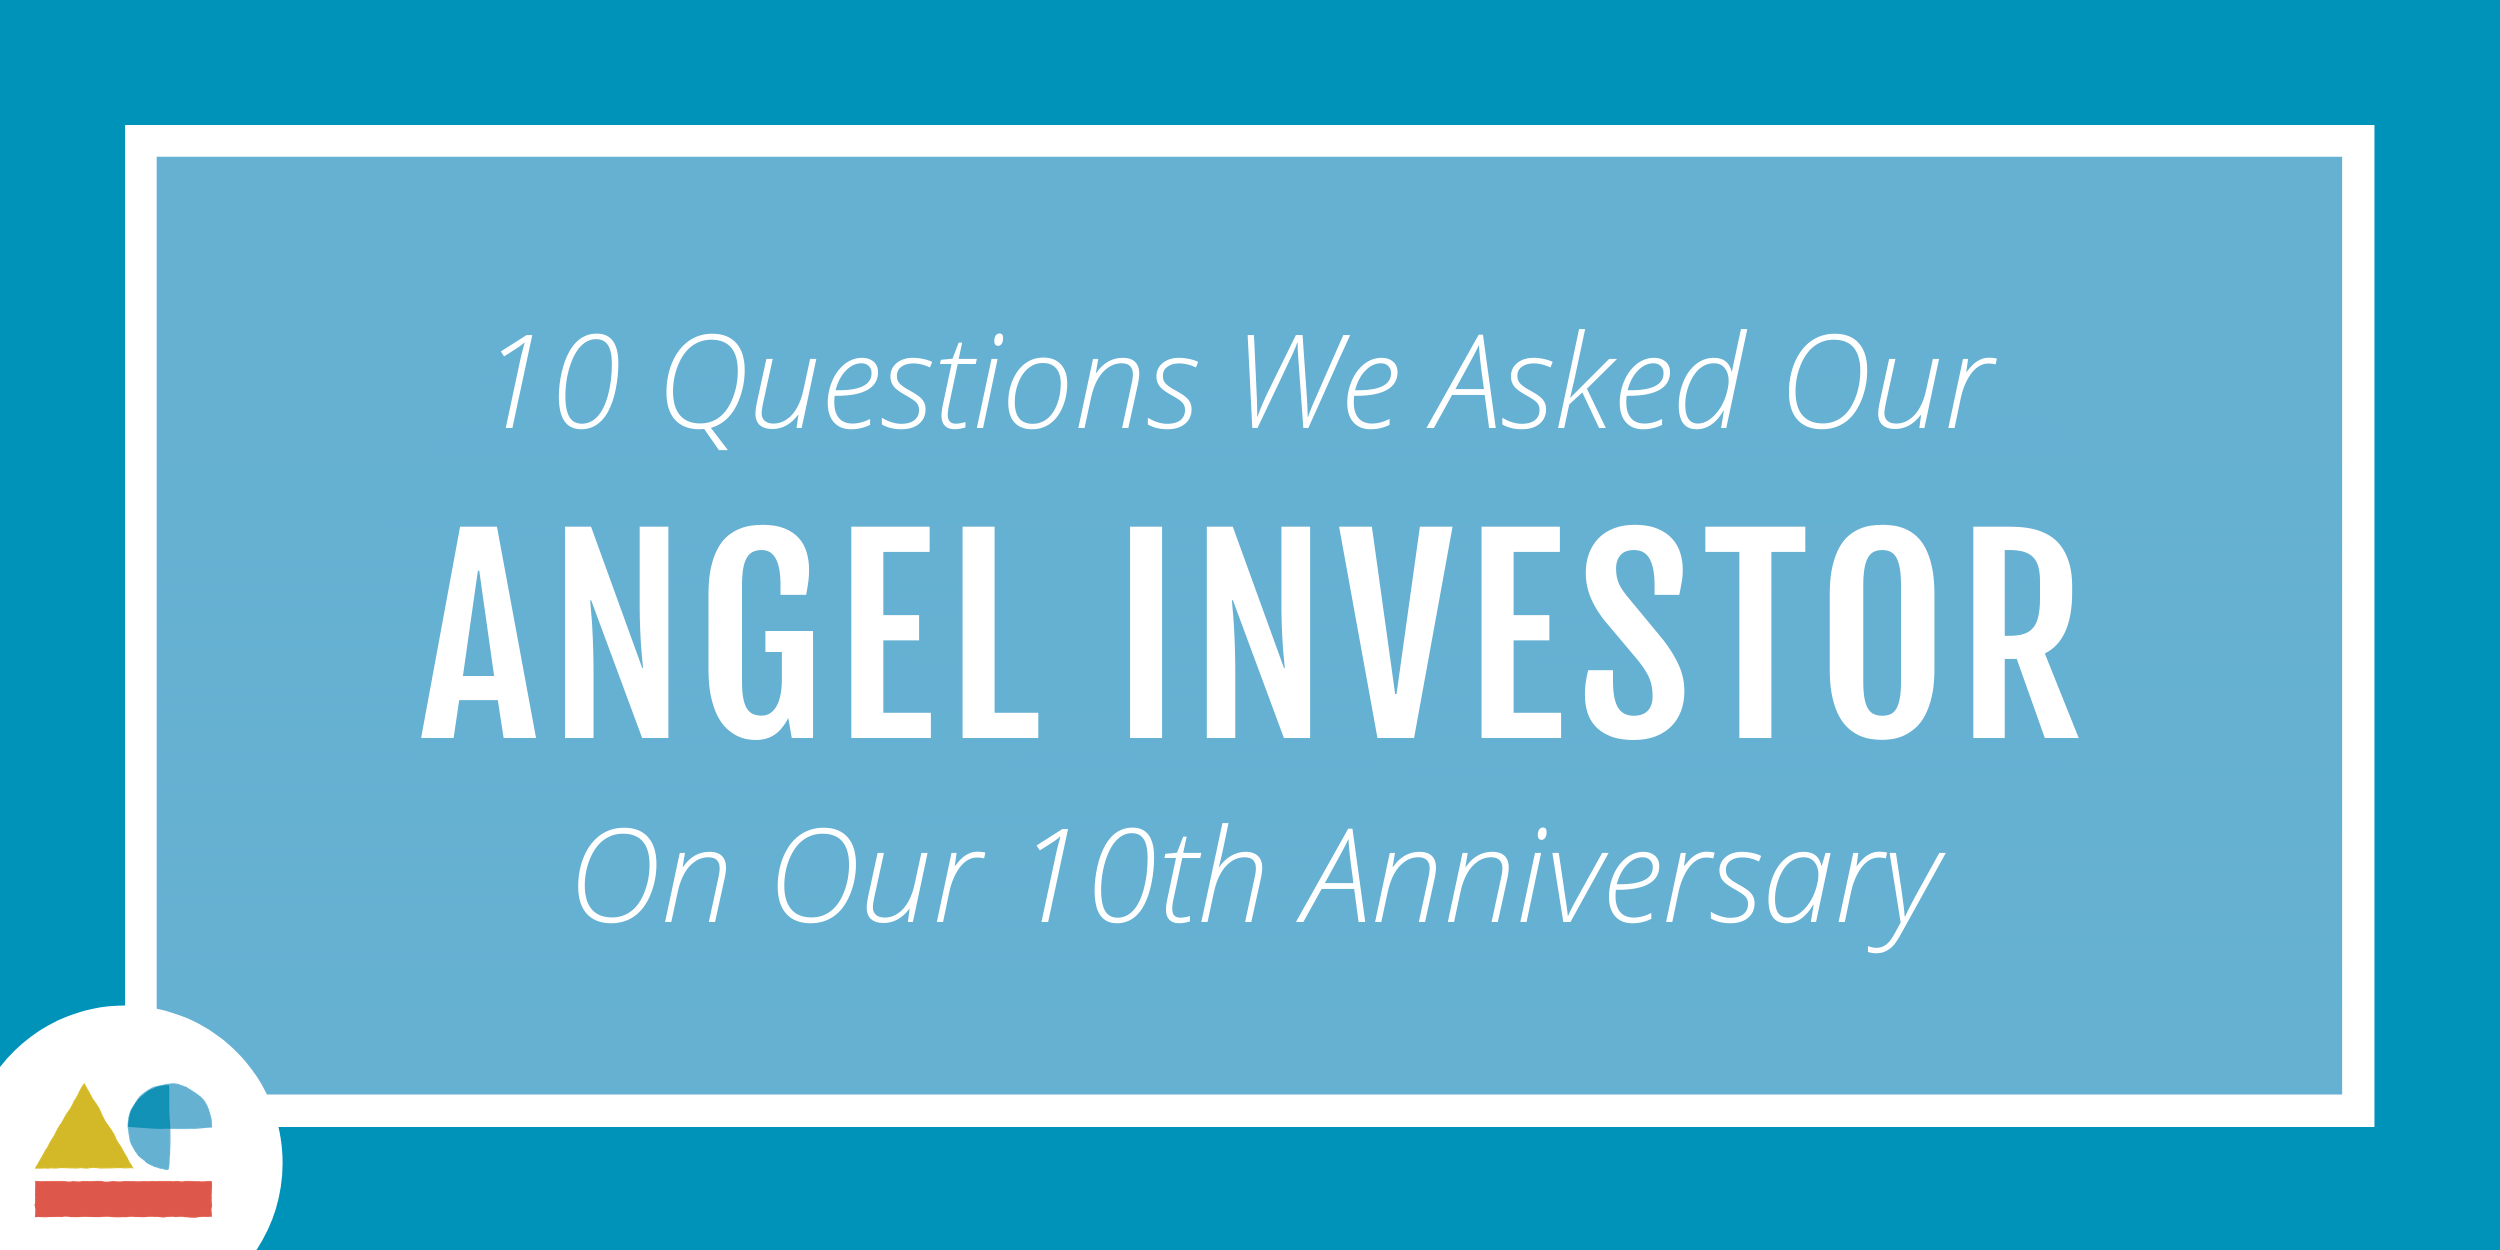 10 questions we asked our angel investor on our 10th anniversary